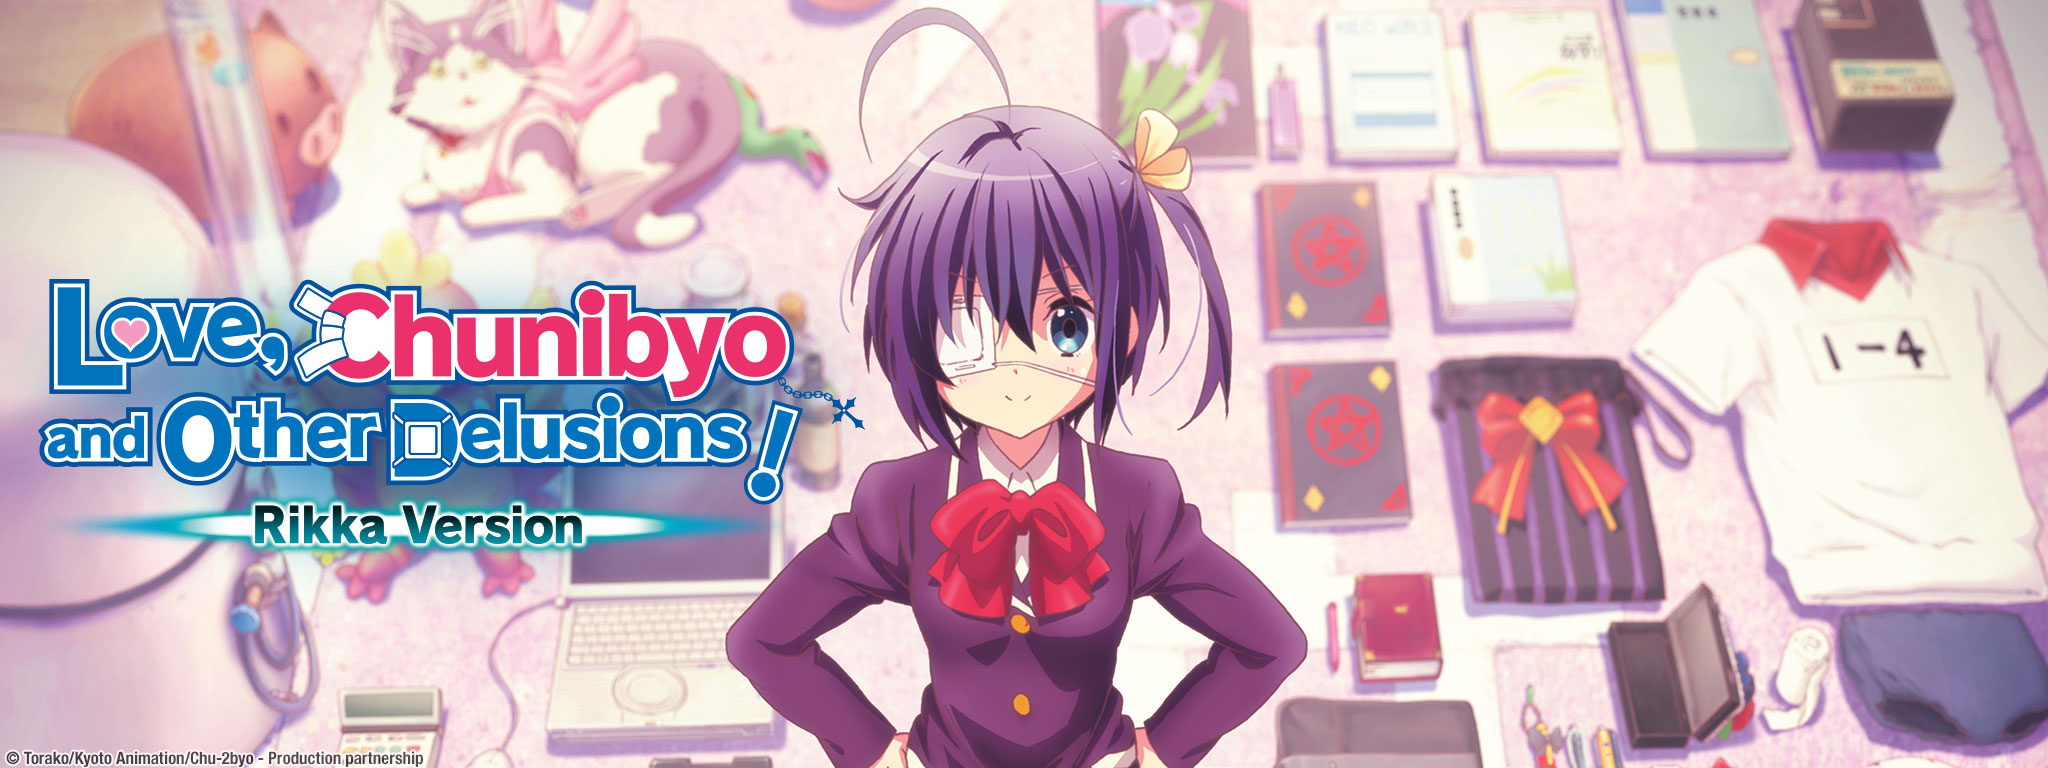 Title Art for Love, Chunibyo and Other Delusions!: Rikka Version